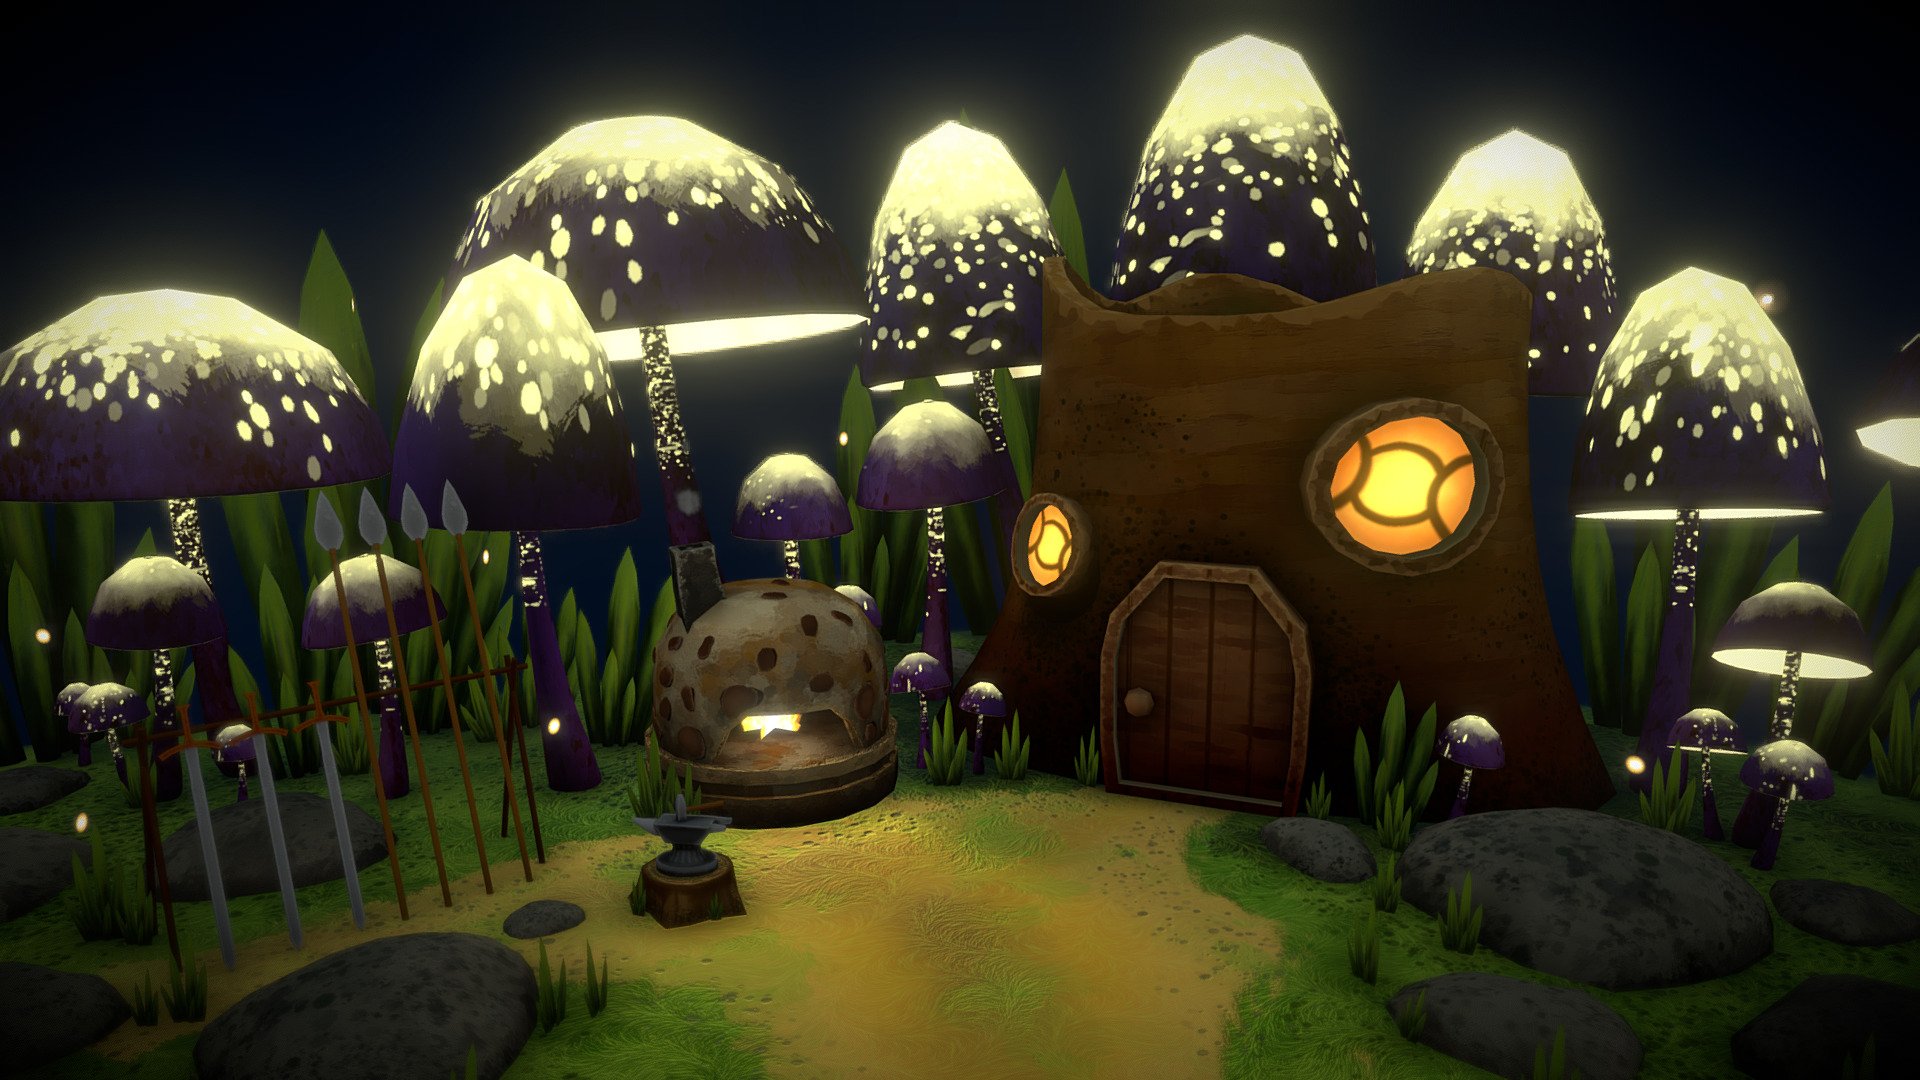 Small 3D scene created as a final project for one of my classes. A tiny mouse blacksmith lives there. Model and animation done in 3Ds Max, textures in 3D Substance 3d model